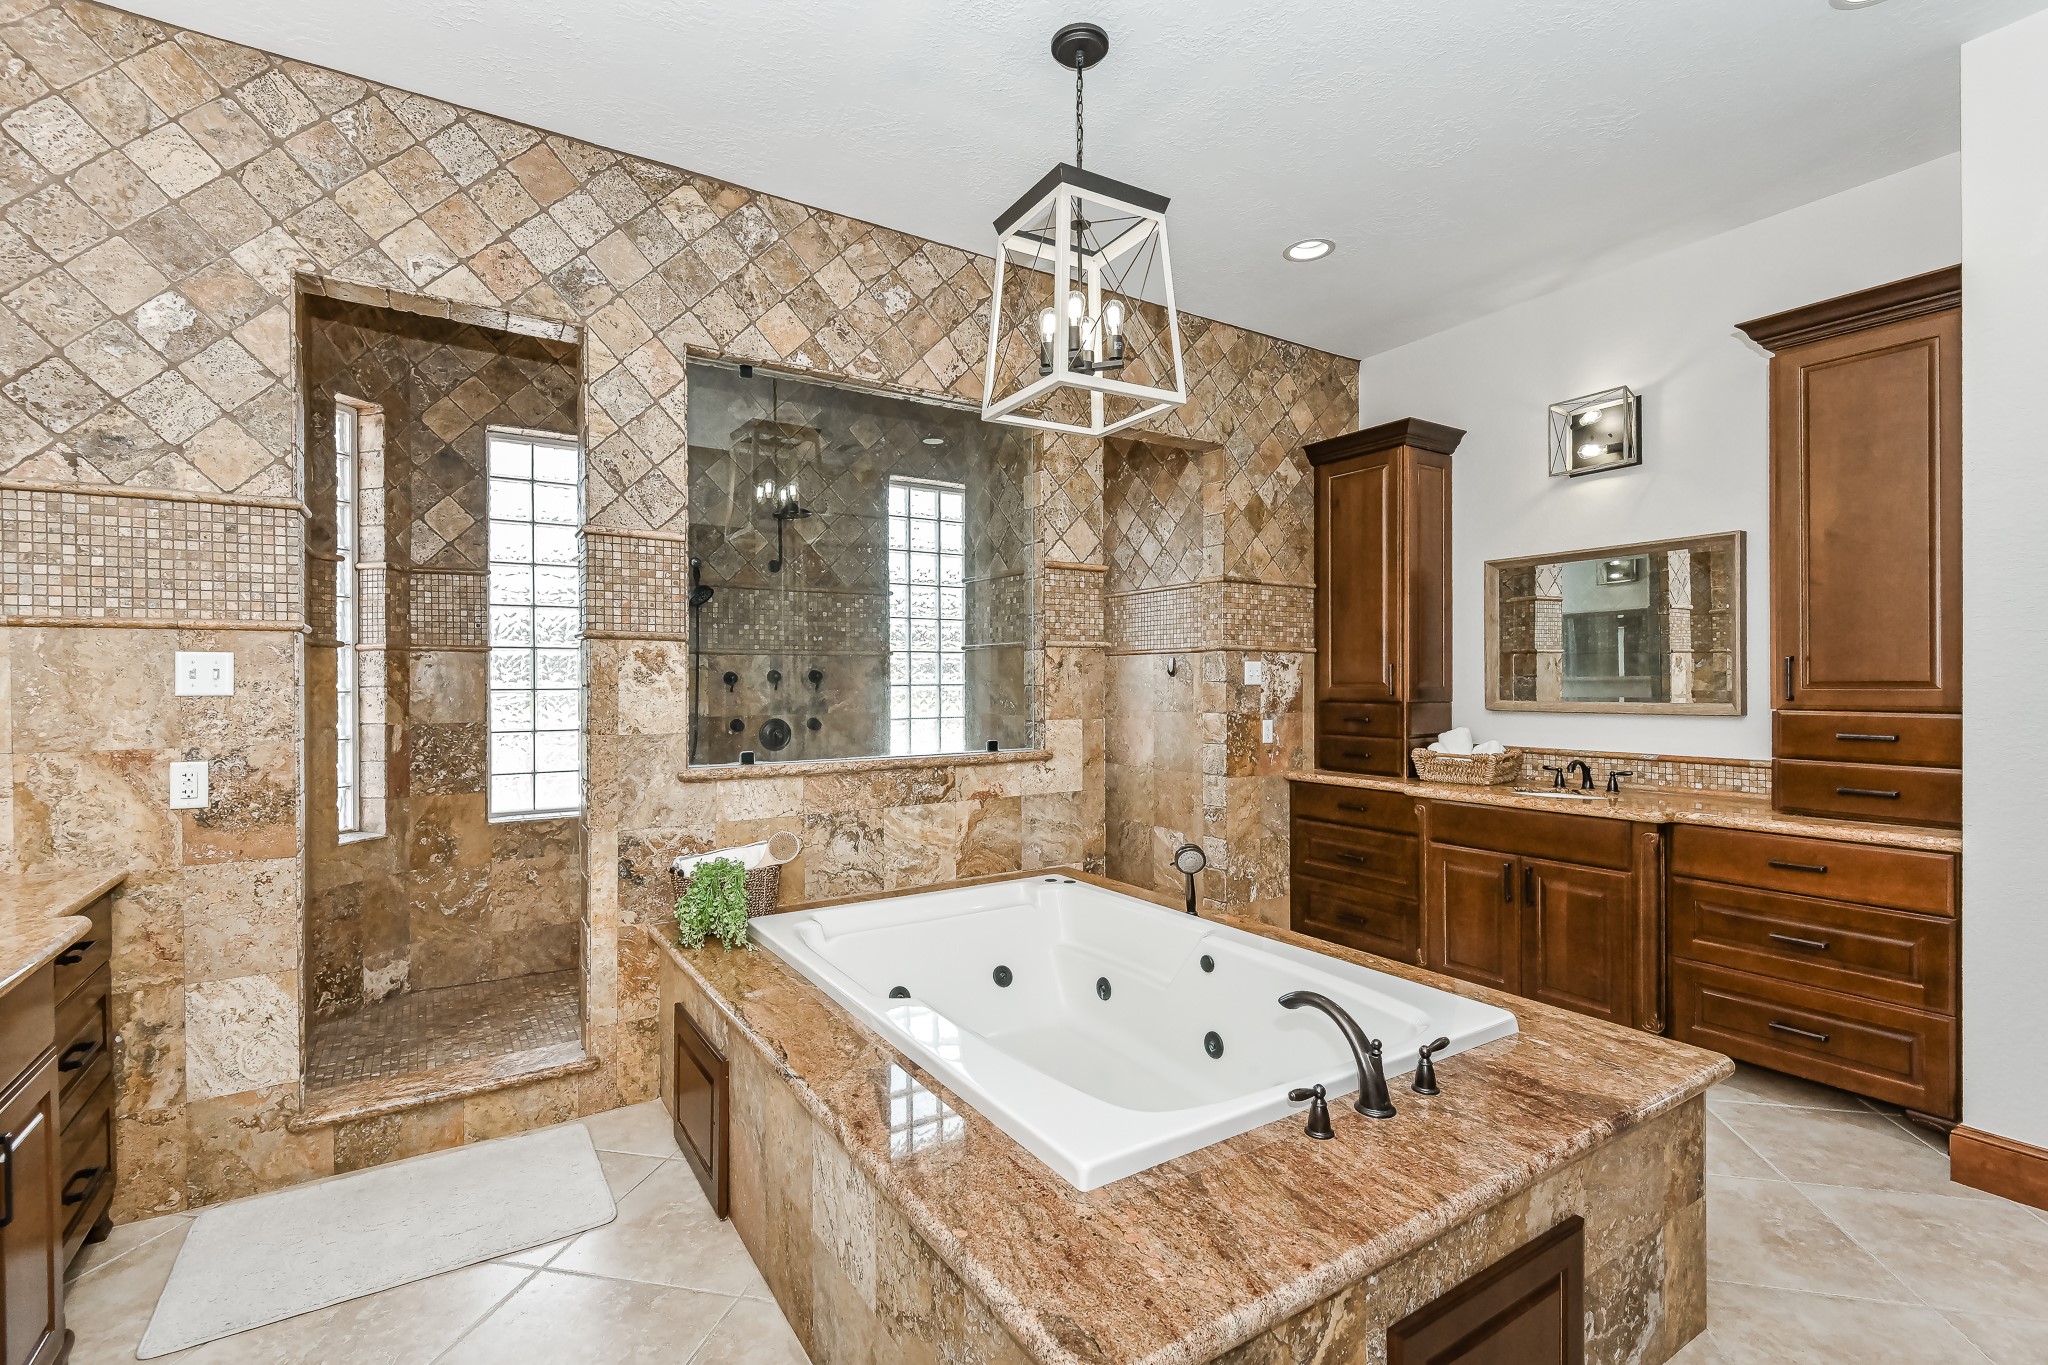 Master bathroom with an oversized jetted tub and a walk through double entrance rain shower.